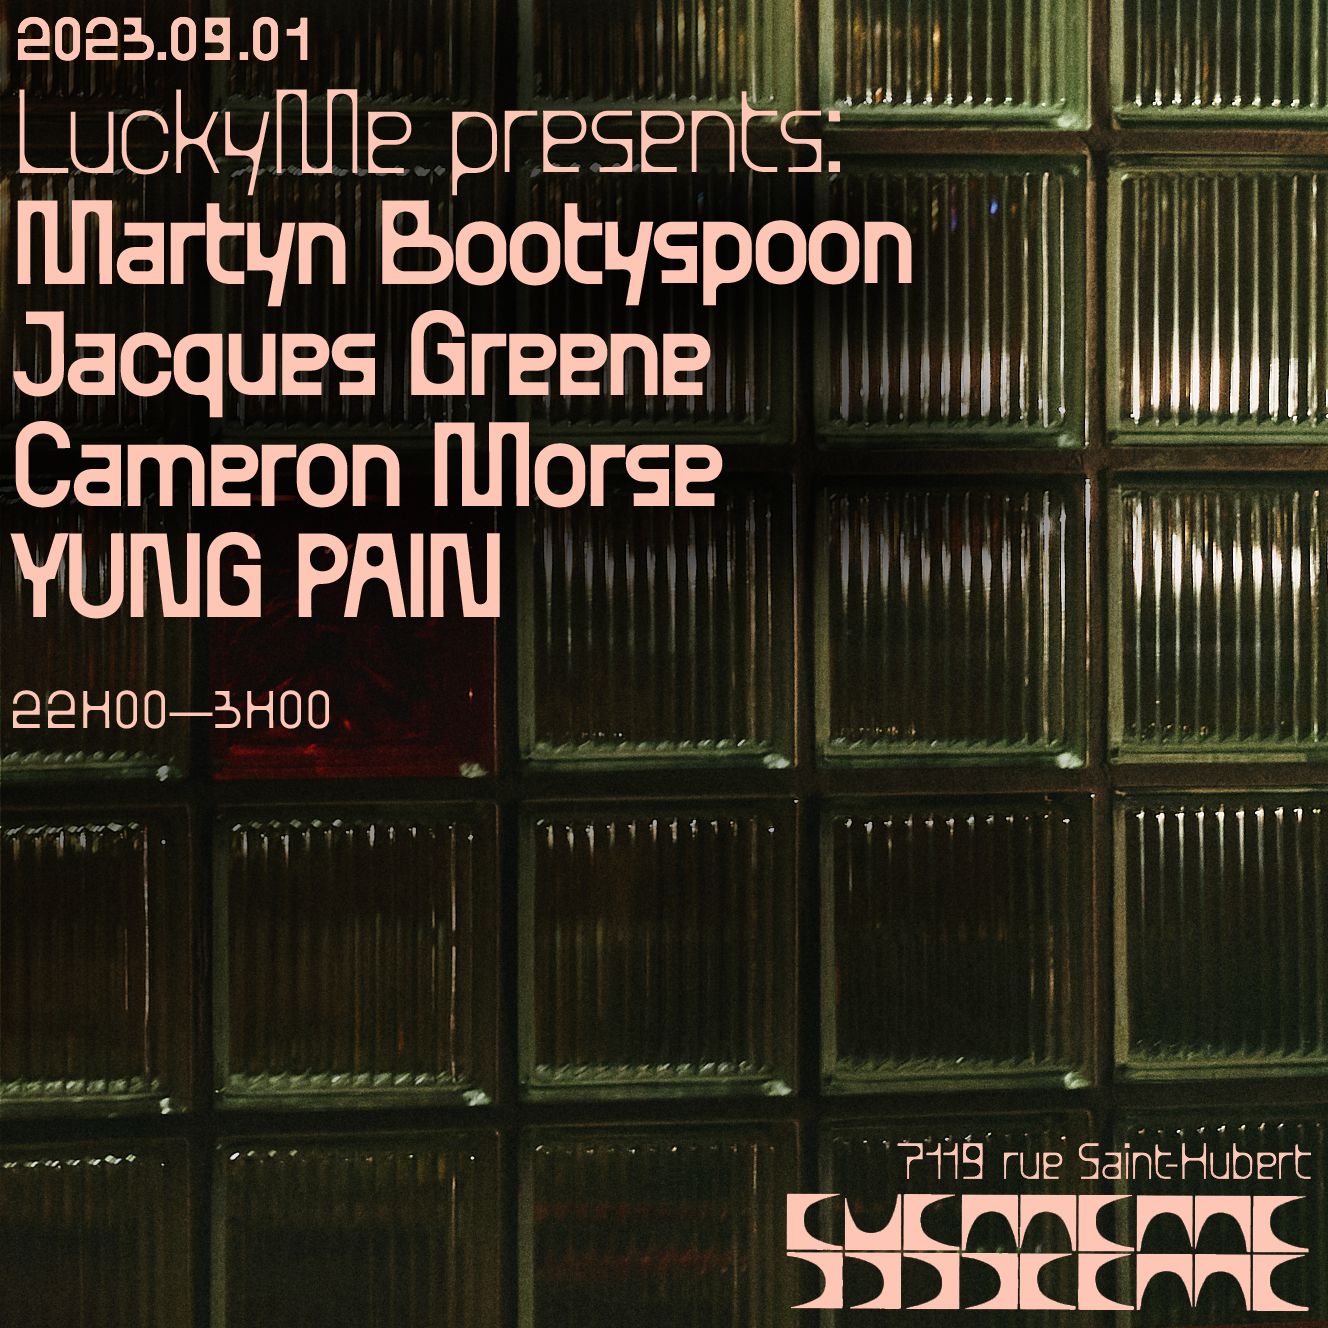 LUCKYME presents: Martyn Bootyspoon + Jacques Greene + Cameron Morse  YUNG PAIN - フライヤー表